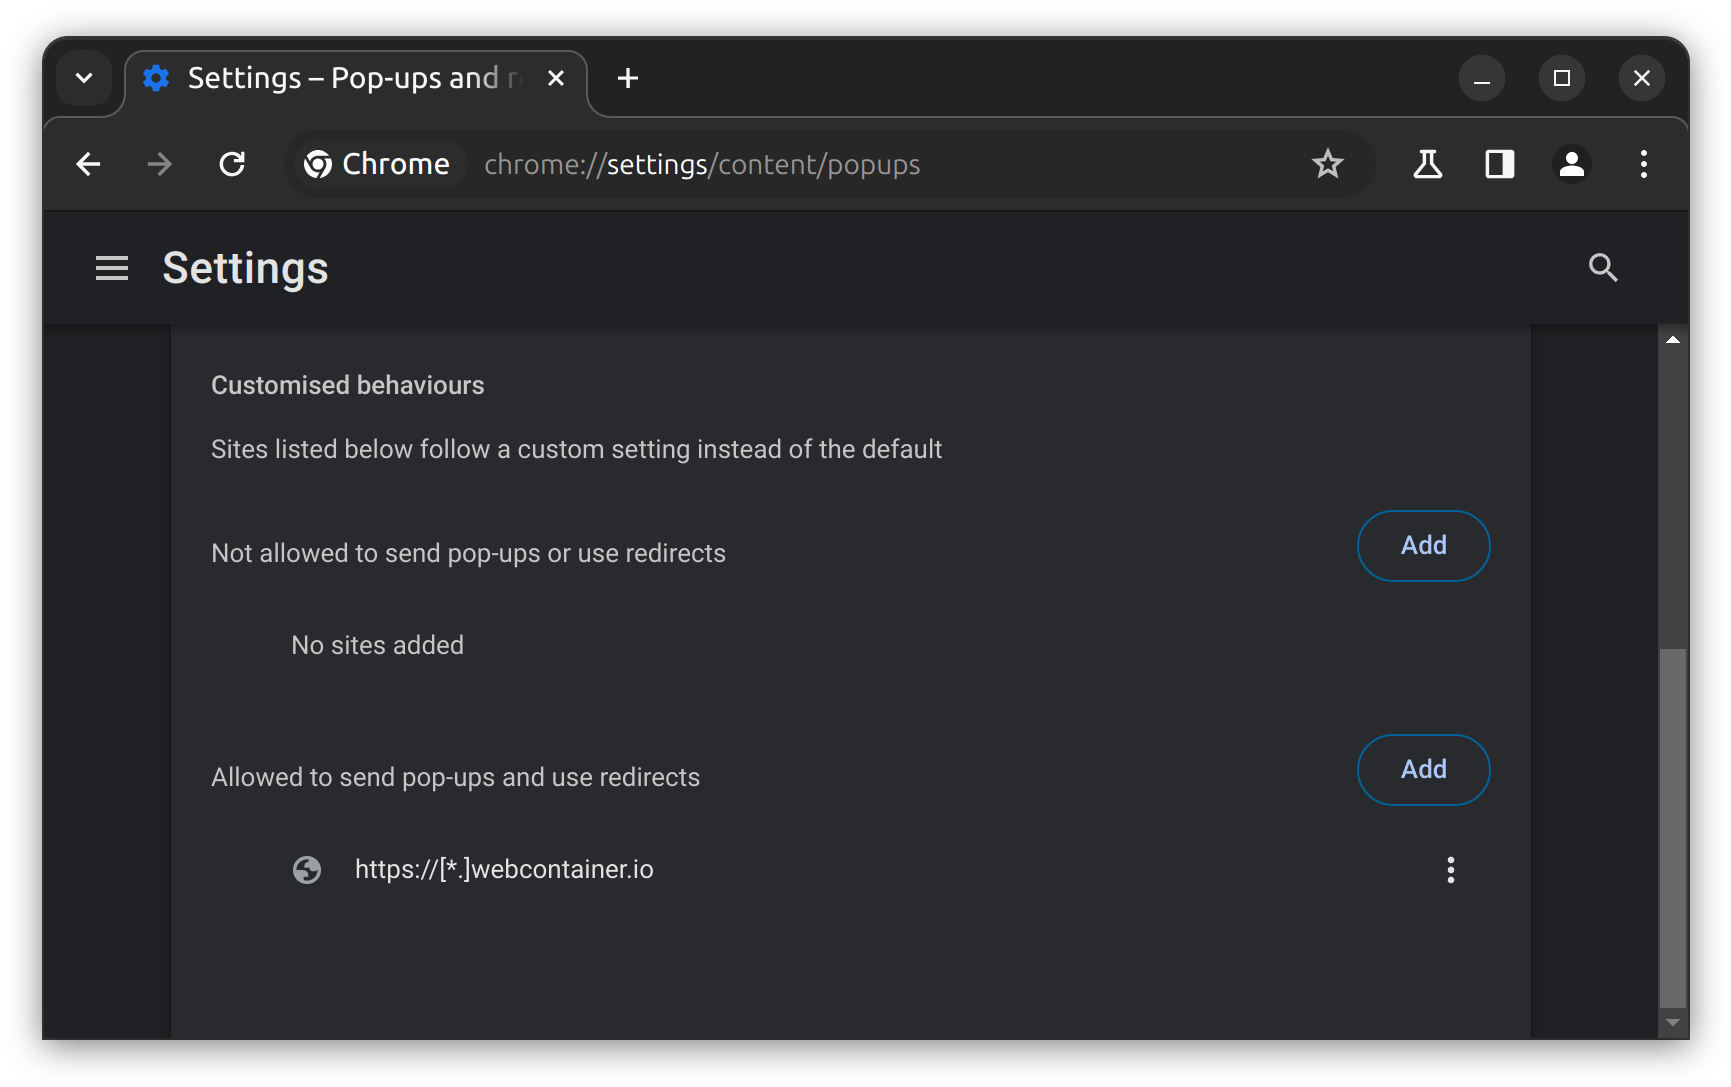 Chrome popups settings showing the *.webcontainer.io origins as exceptions